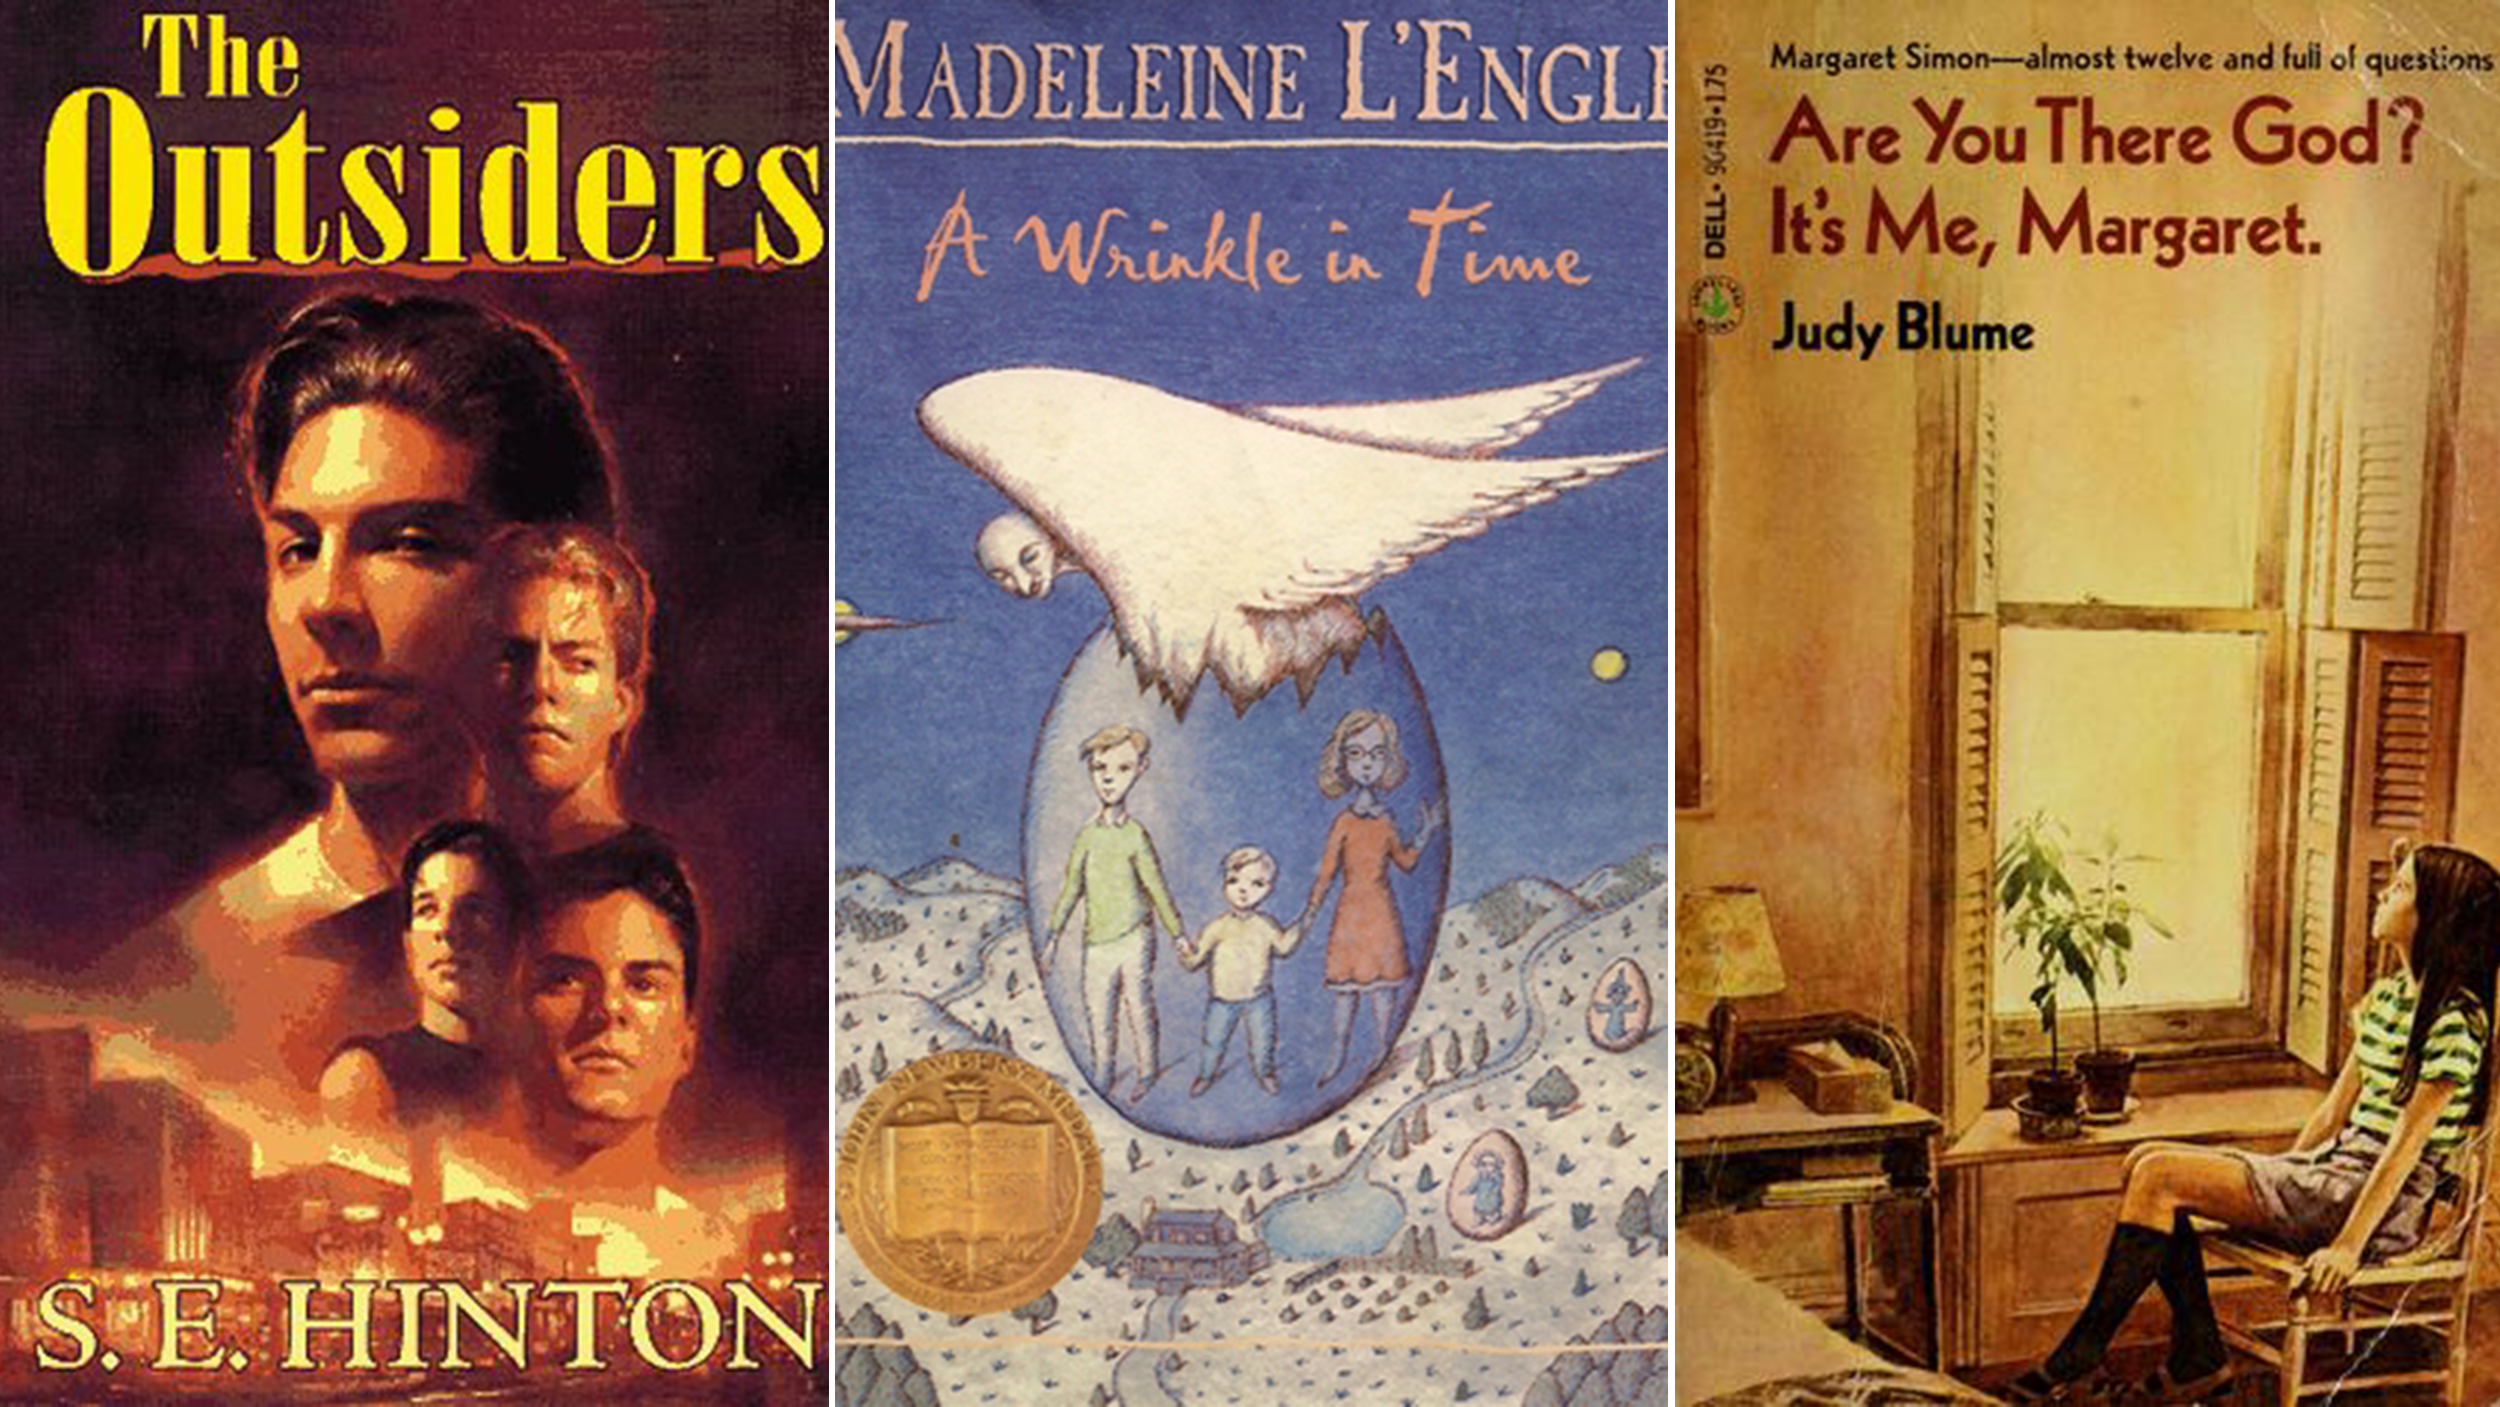 Young Adult Literature And The Classics